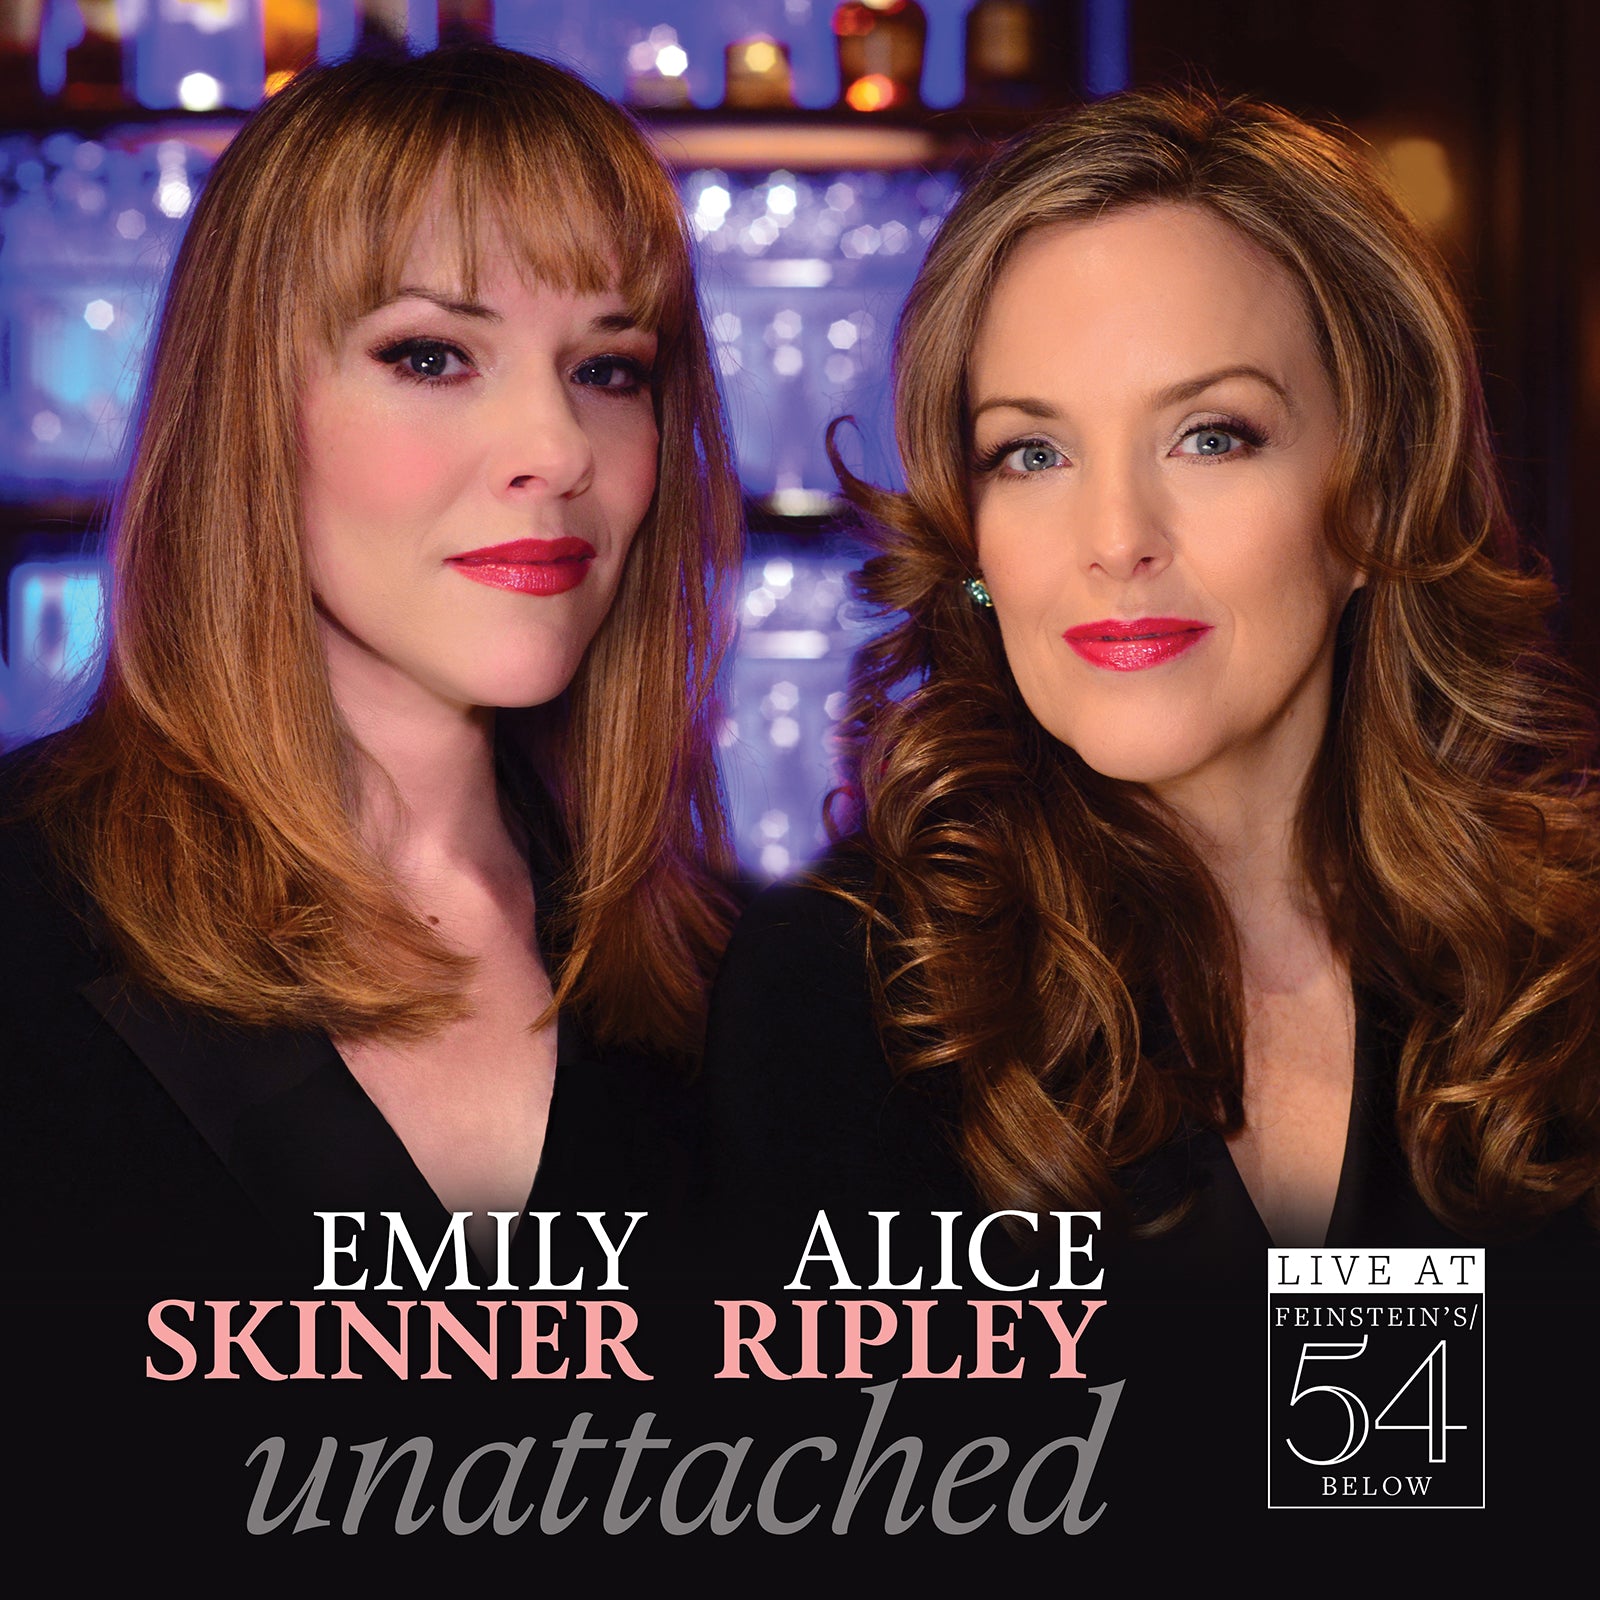 Emily Skinner & Alice Ripley: Unattached – Live at Feinstein's/54 Below [CD]